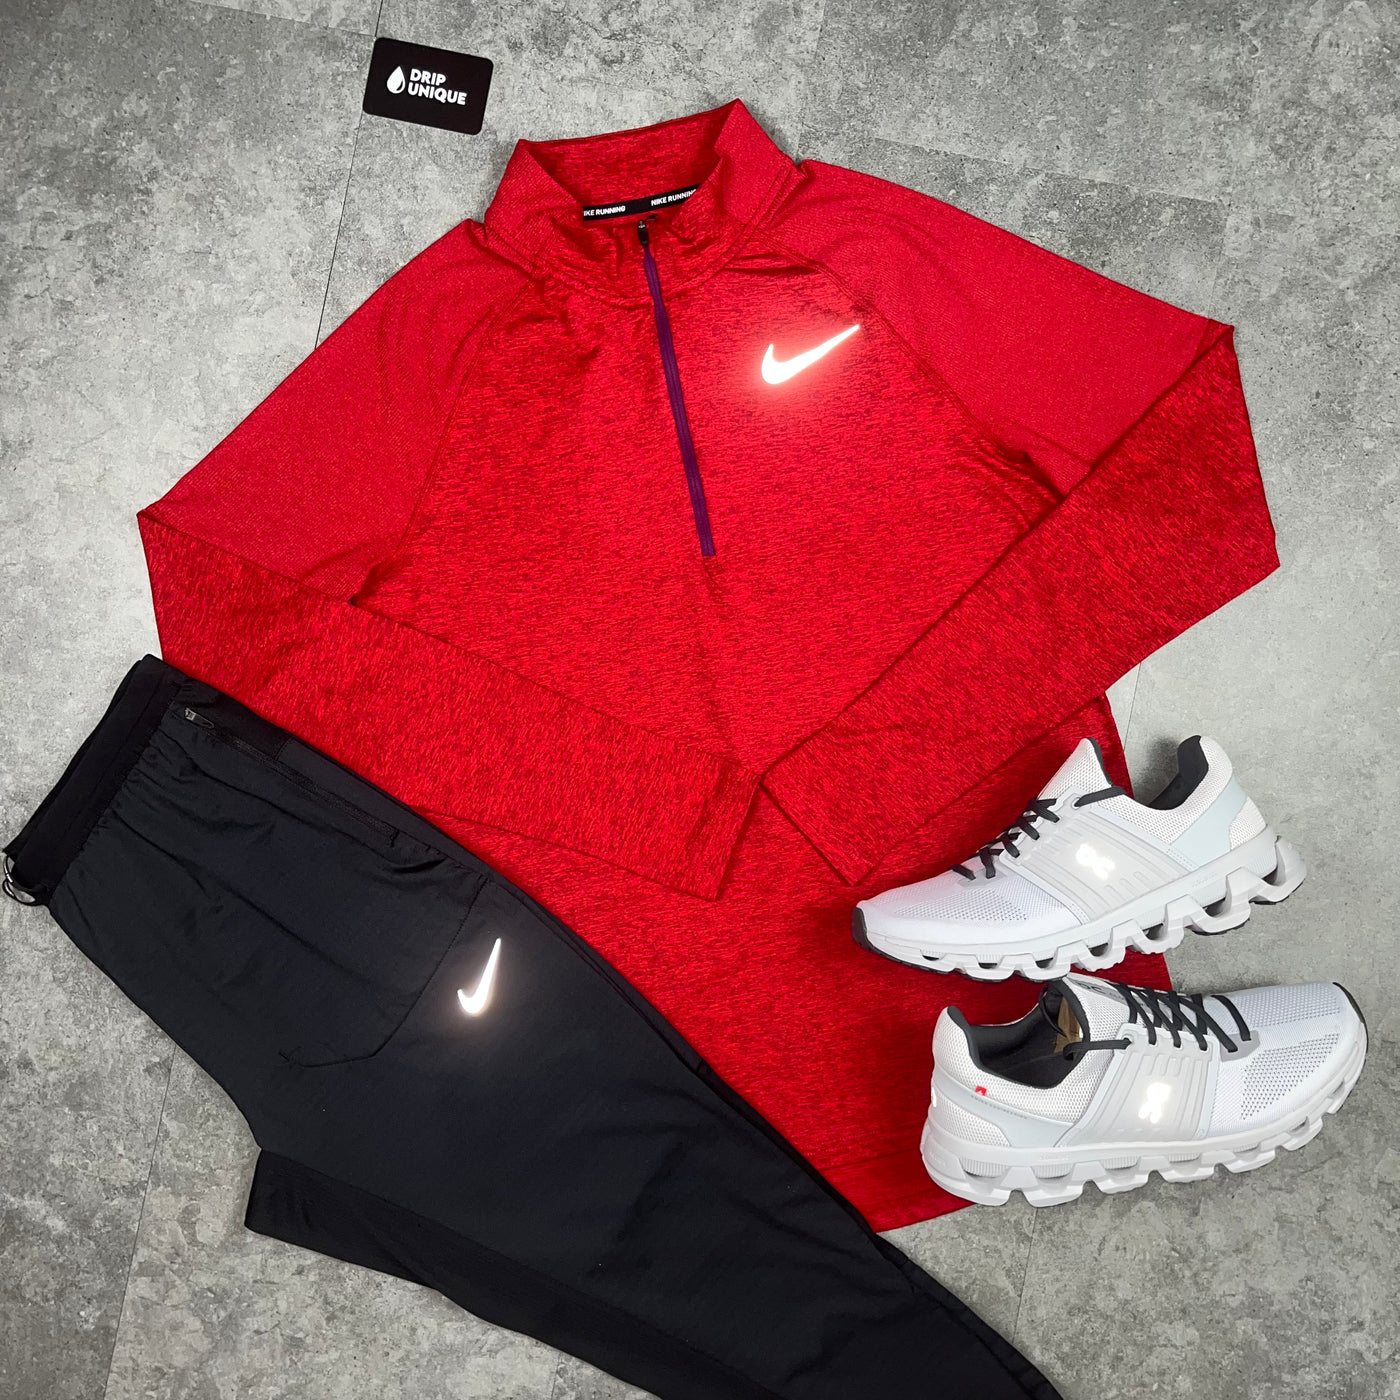 Men's Nike Therma 1/4 Zip Top in a Red colourway close up paired with Nike Black Phenom pants and White On running Cloudswift 3's, dripuniqueuk